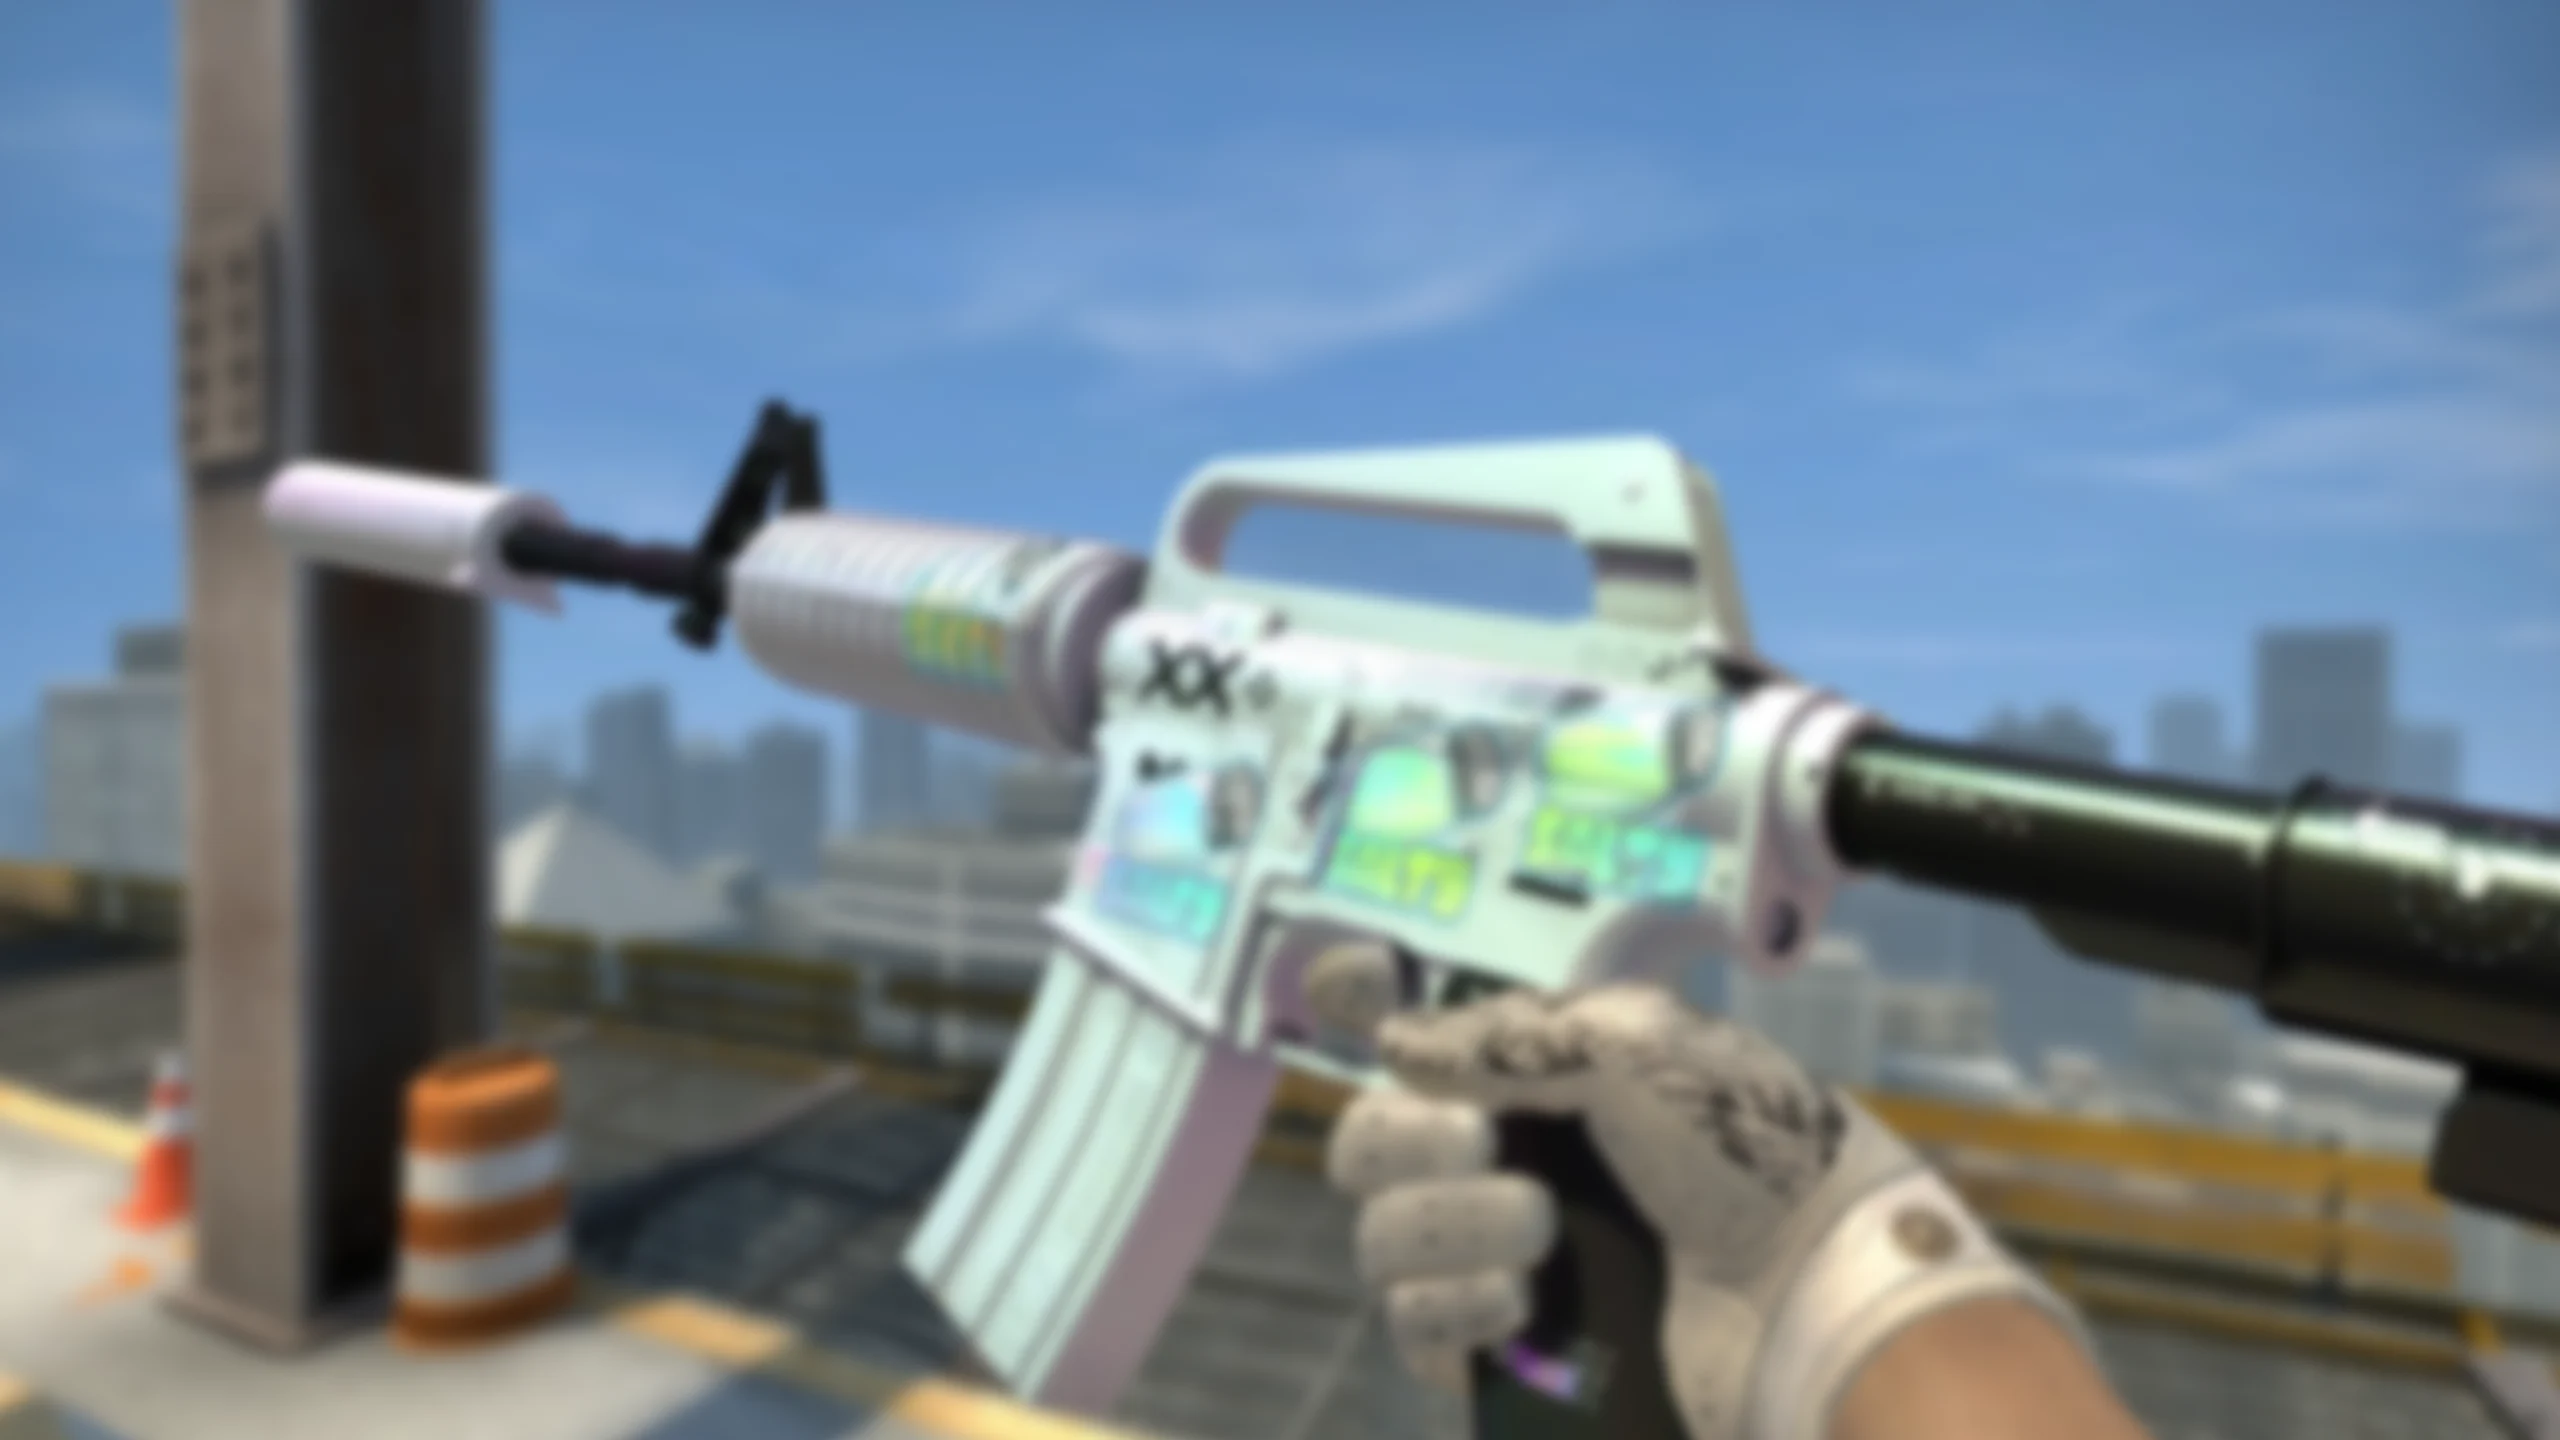 The CS:GO skin combos of the most famous content creators